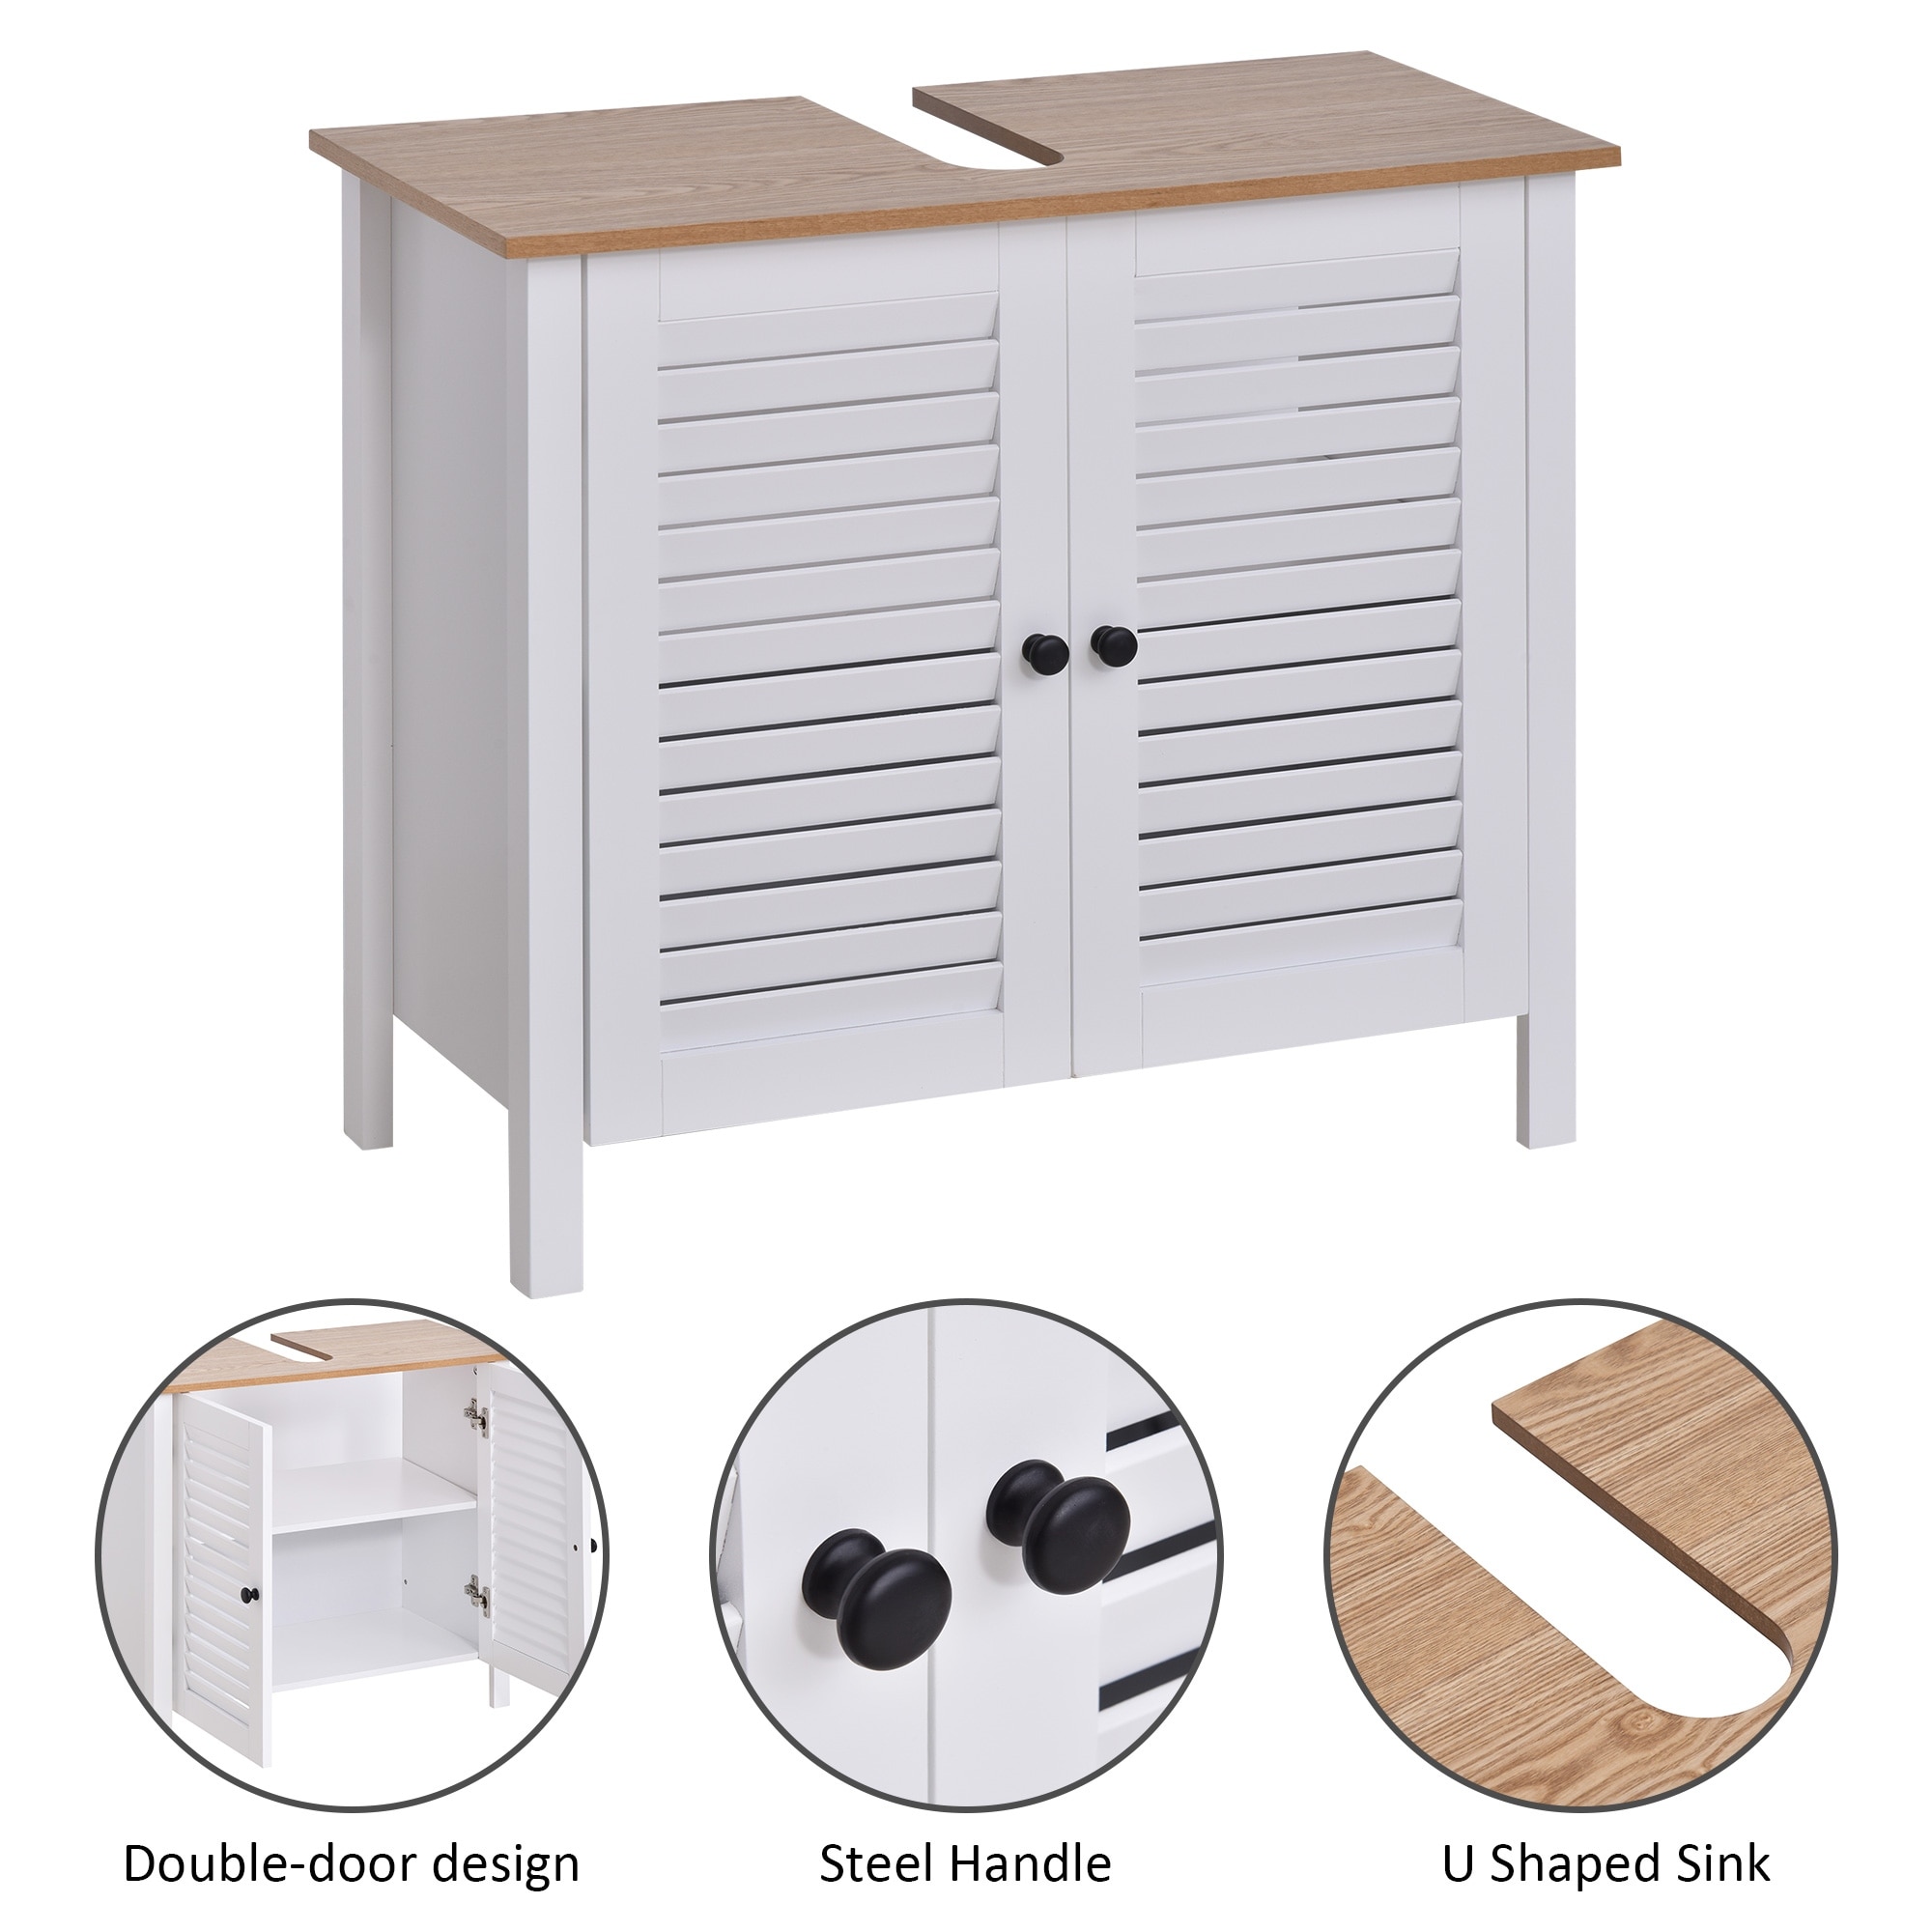 https://ak1.ostkcdn.com/images/products/is/images/direct/366ed663dfe1f8f5753cf455a3943fb66a033280/HOMCOM-Under-Sink-Storage-Cabinet-with-Double-Layers-Bathroom-Cabinet-Space-Saver-Organizer-2-Door-Floor-Cabinet%2C-White.jpg